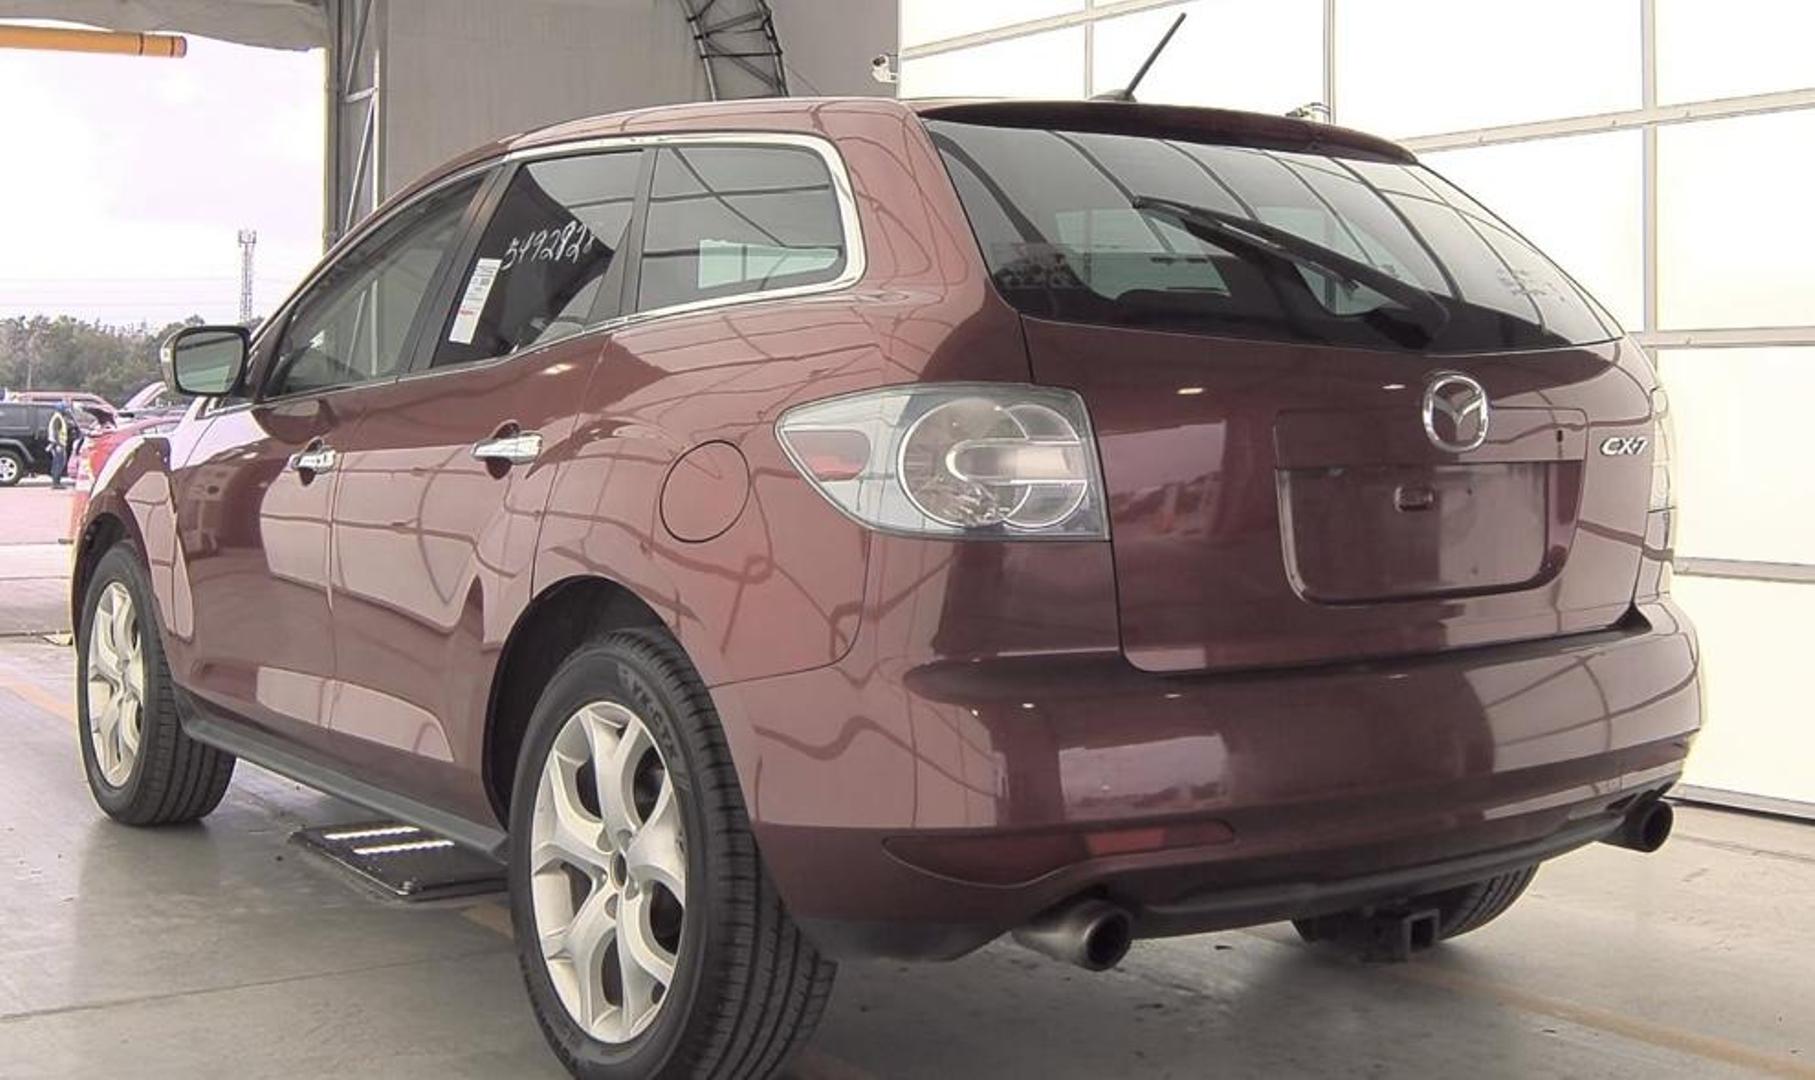 Used 2010 Mazda CX-7 s Grand Touring with VIN JM3ER2W39A0340250 for sale in Dallas, TX